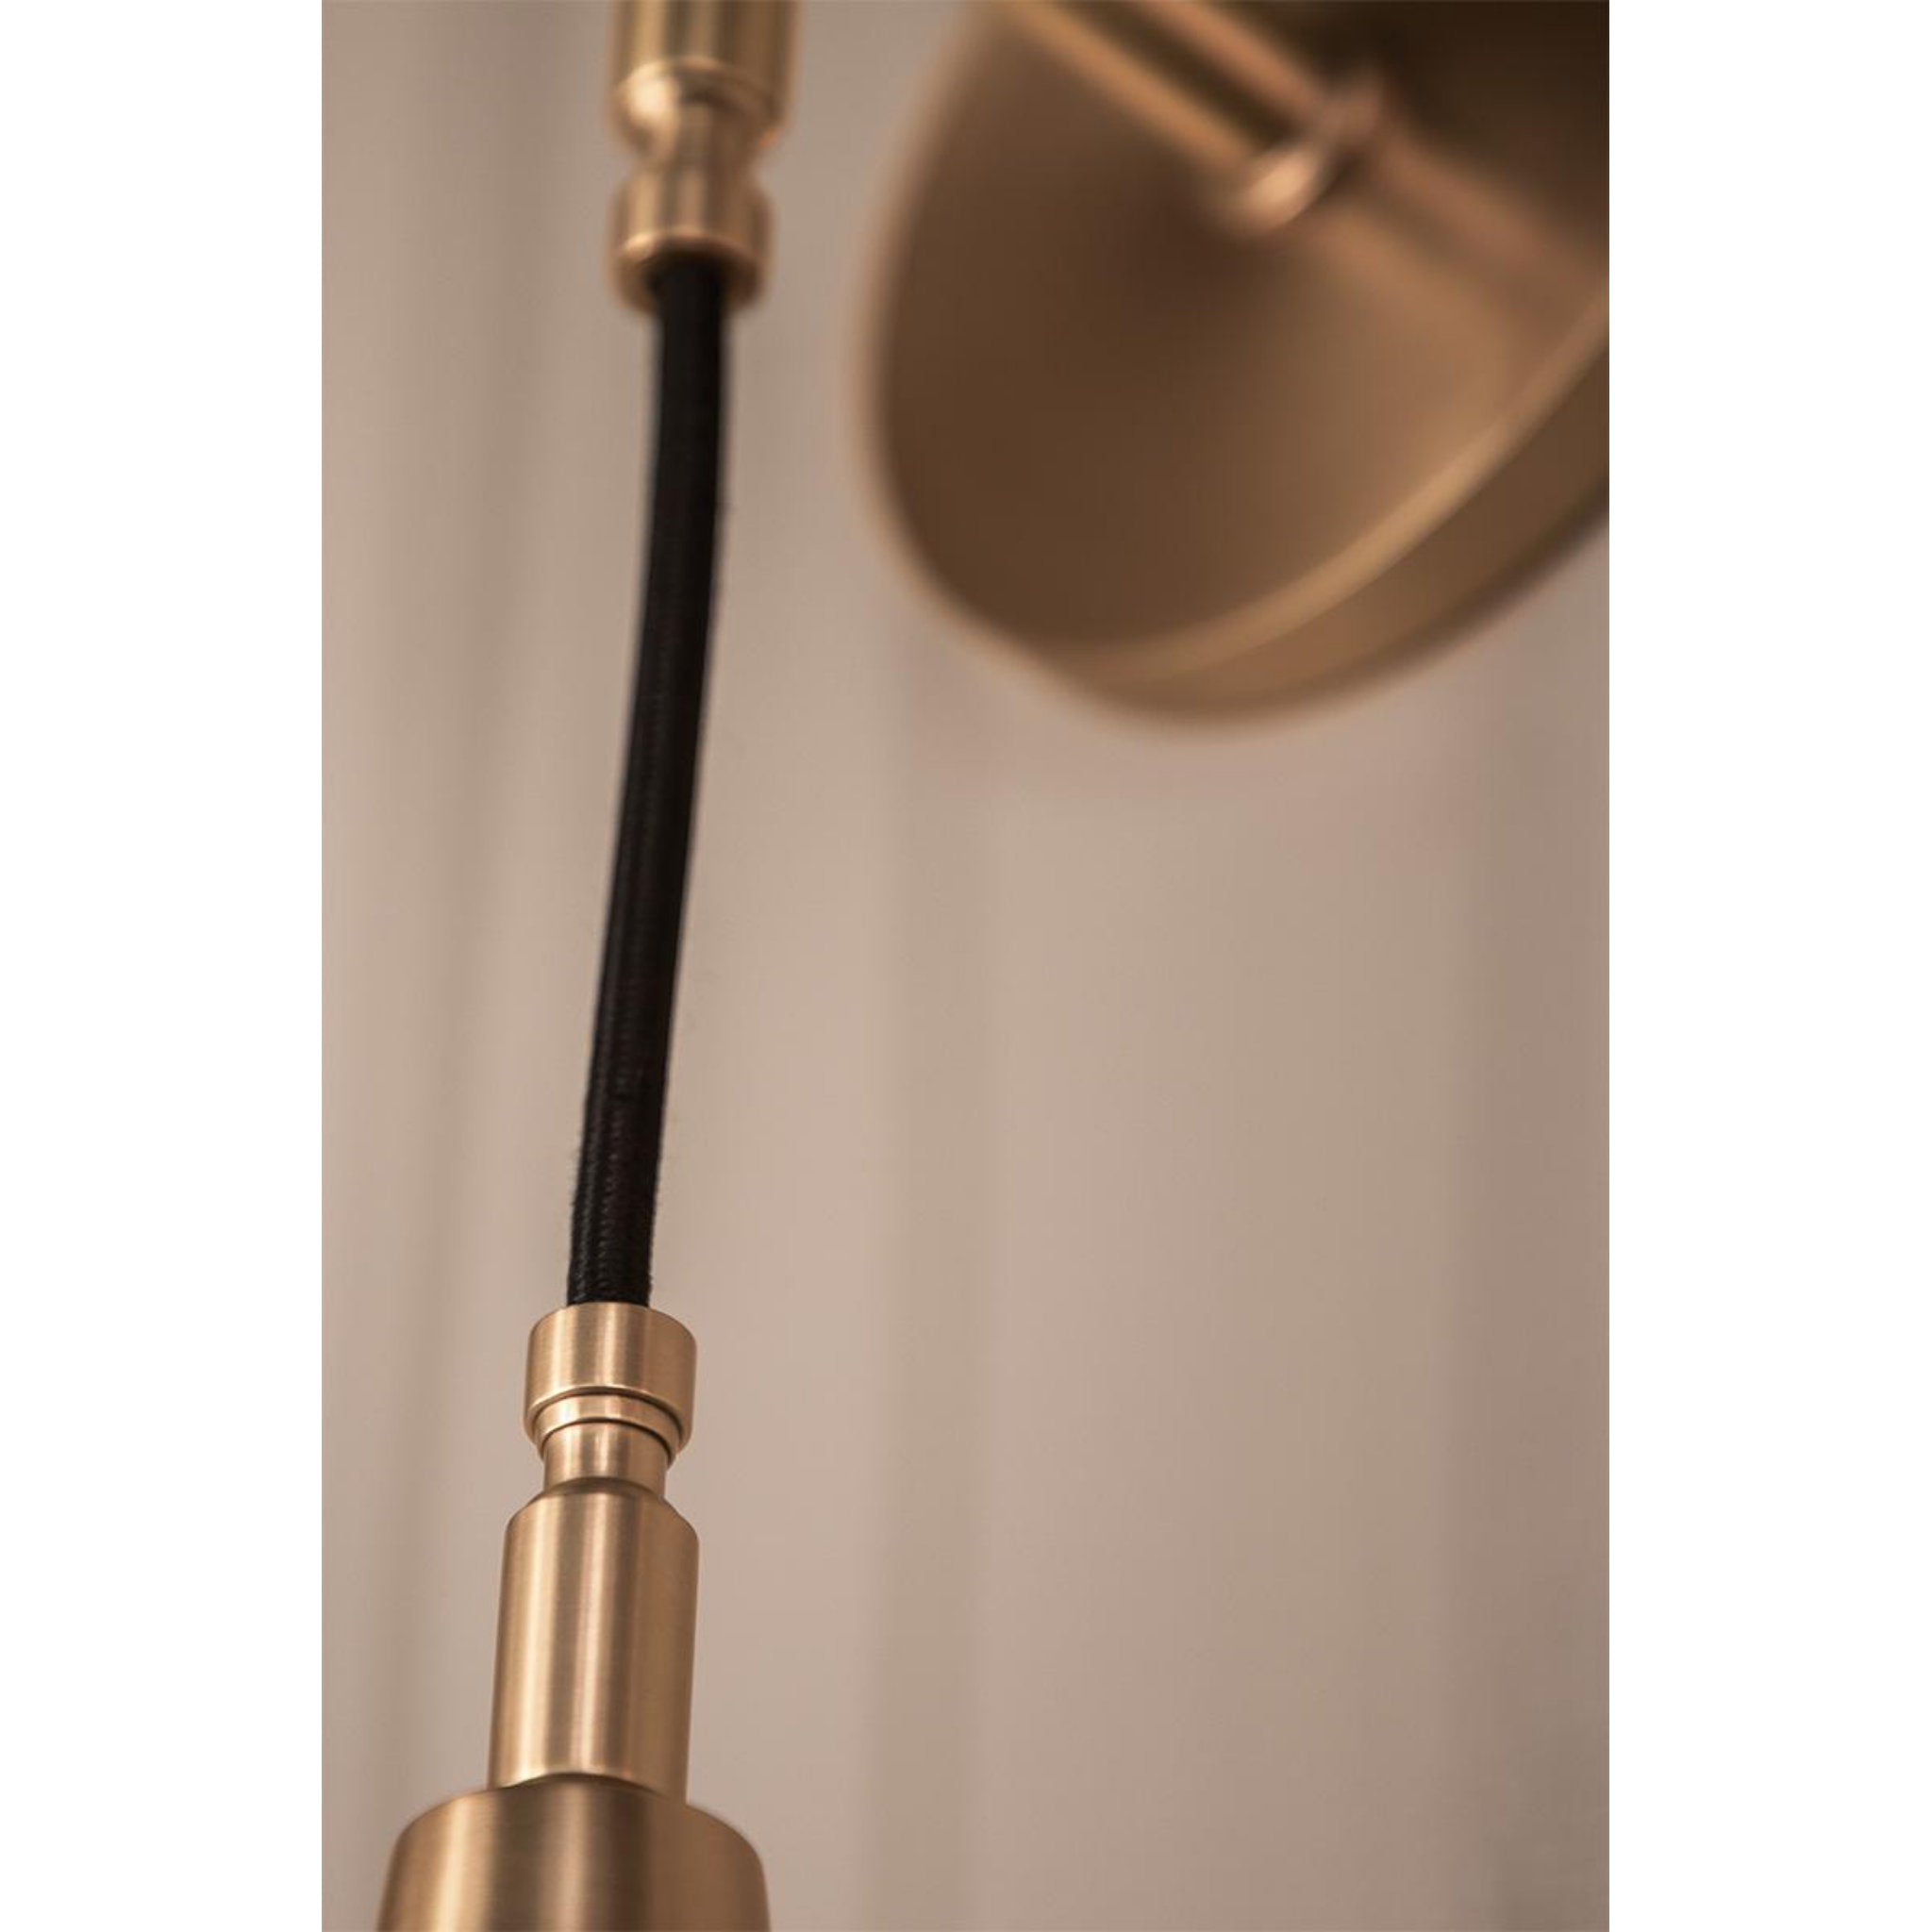 Heirloom 1 Light Wall Sconce in Aged Brass